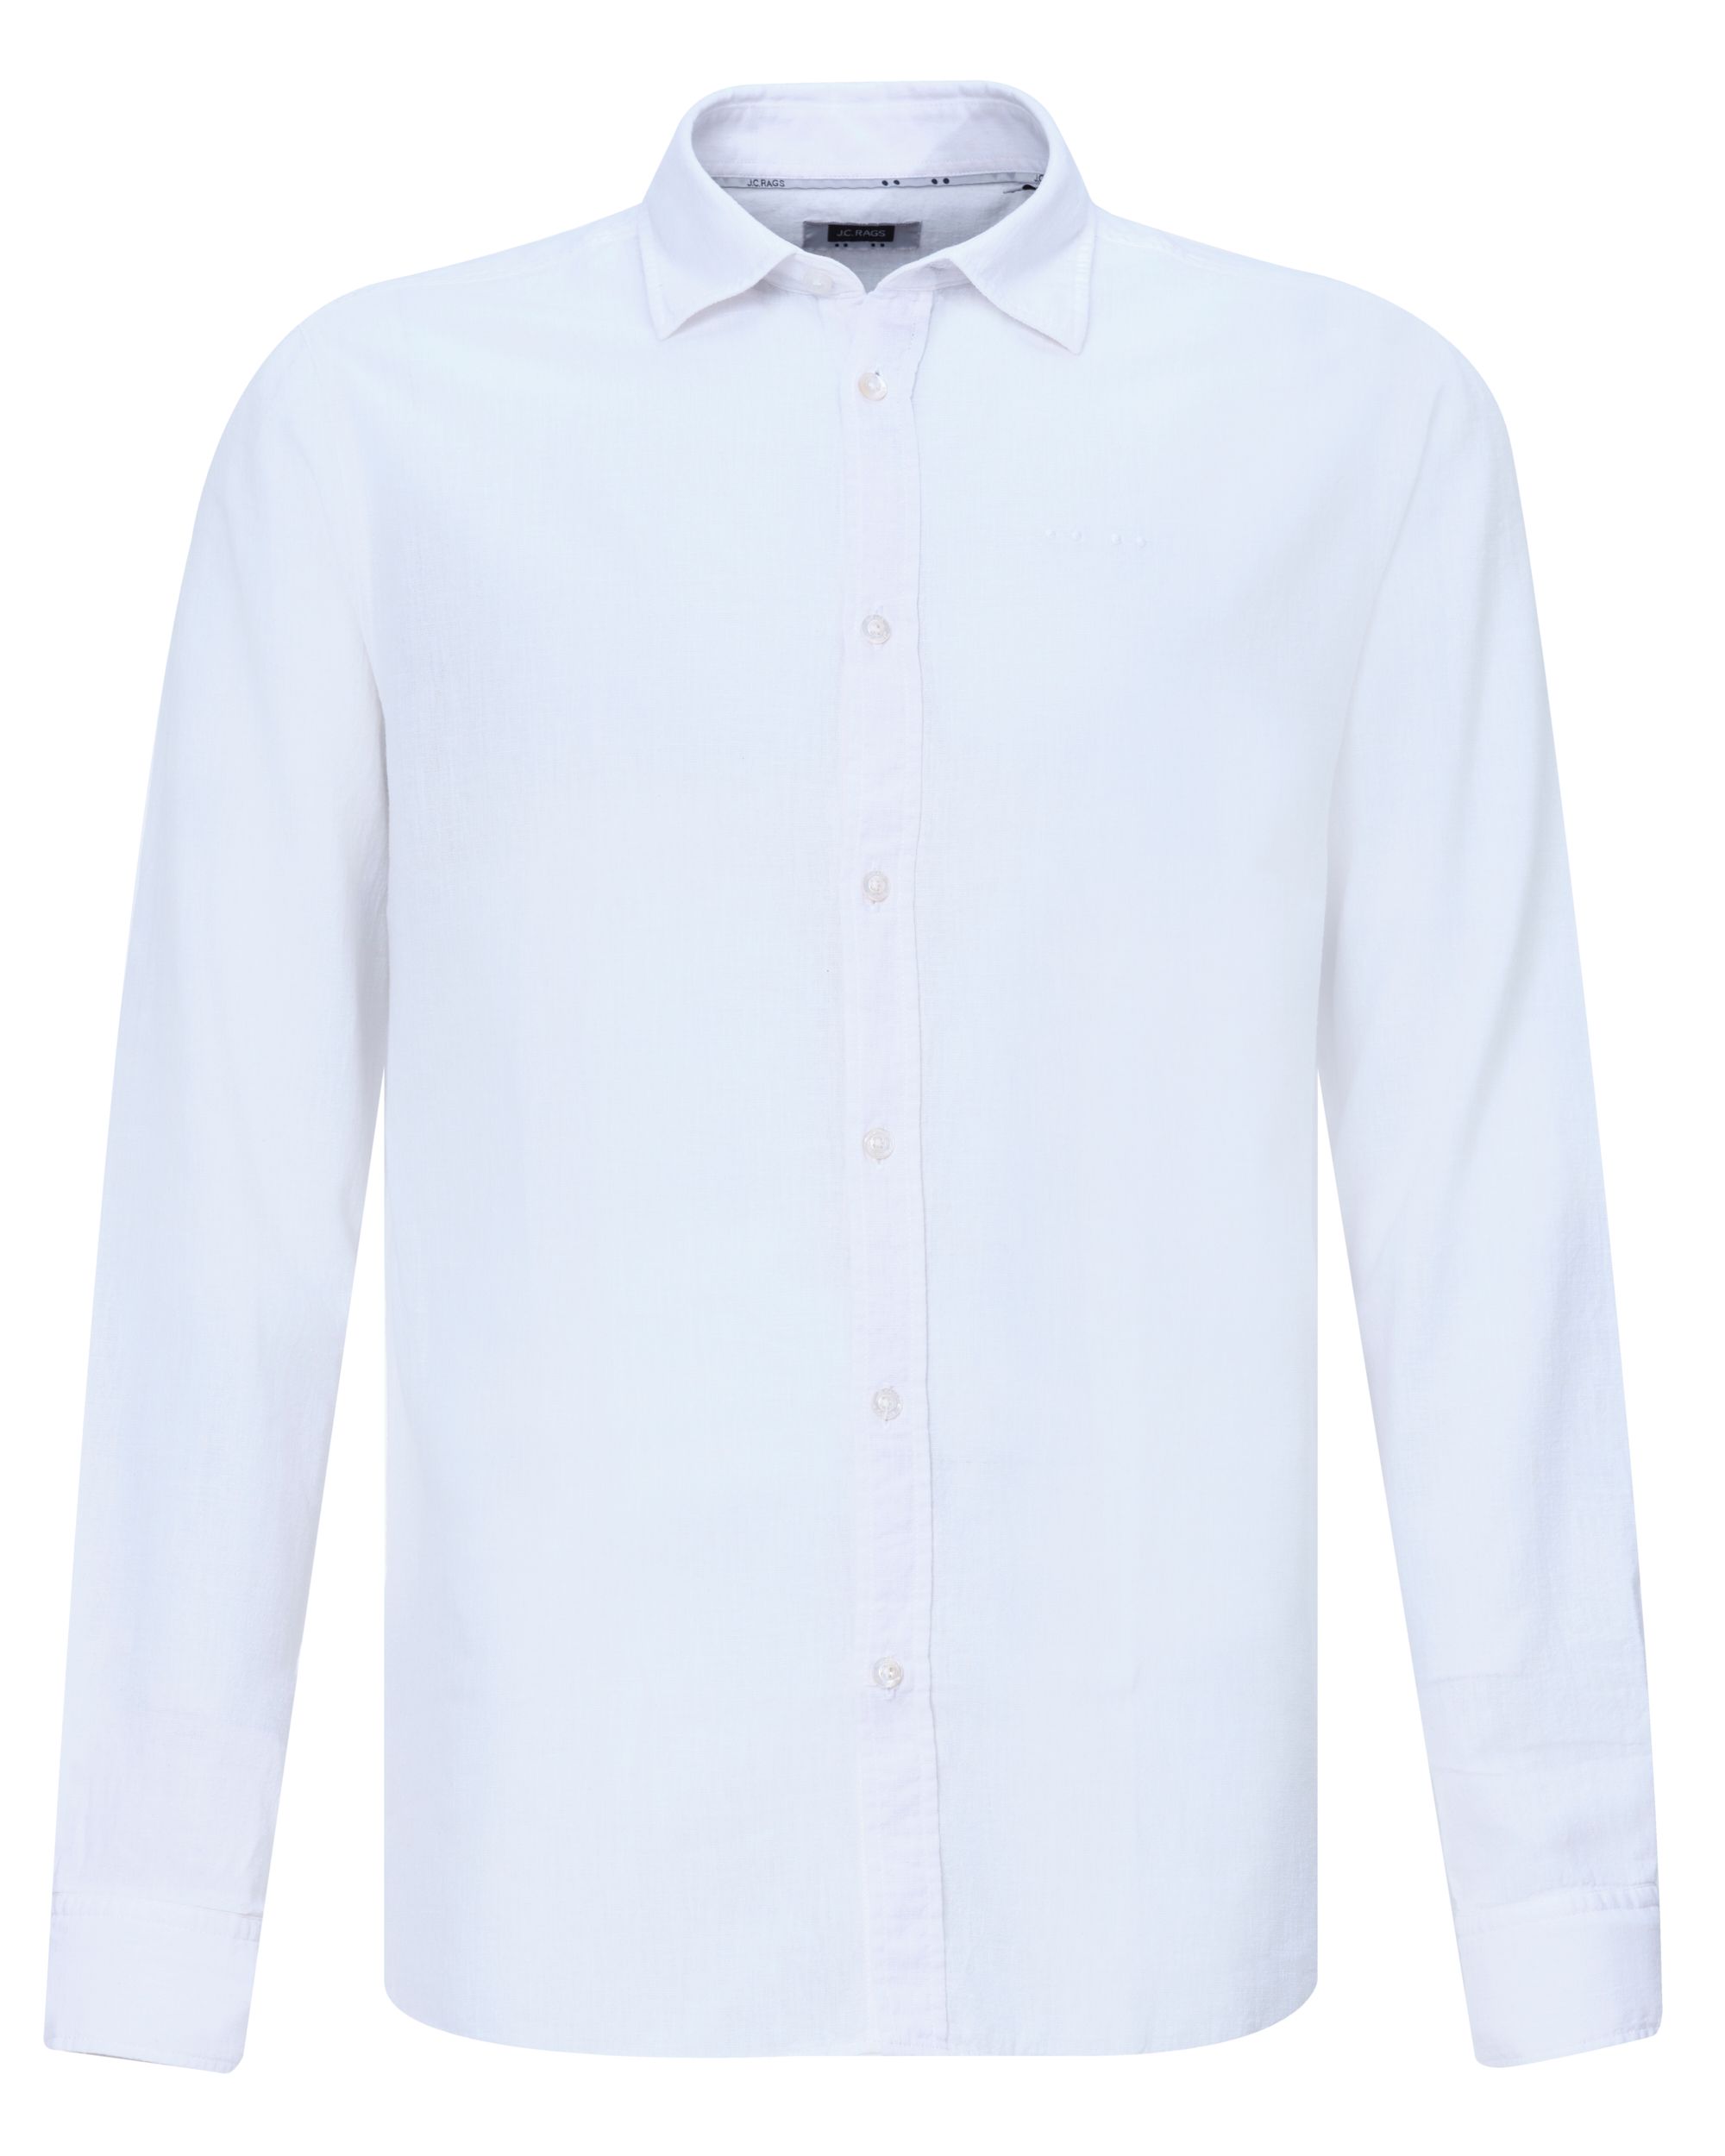 J.C. RAGS Casual Overhemd LM WHITE 081589-001-L